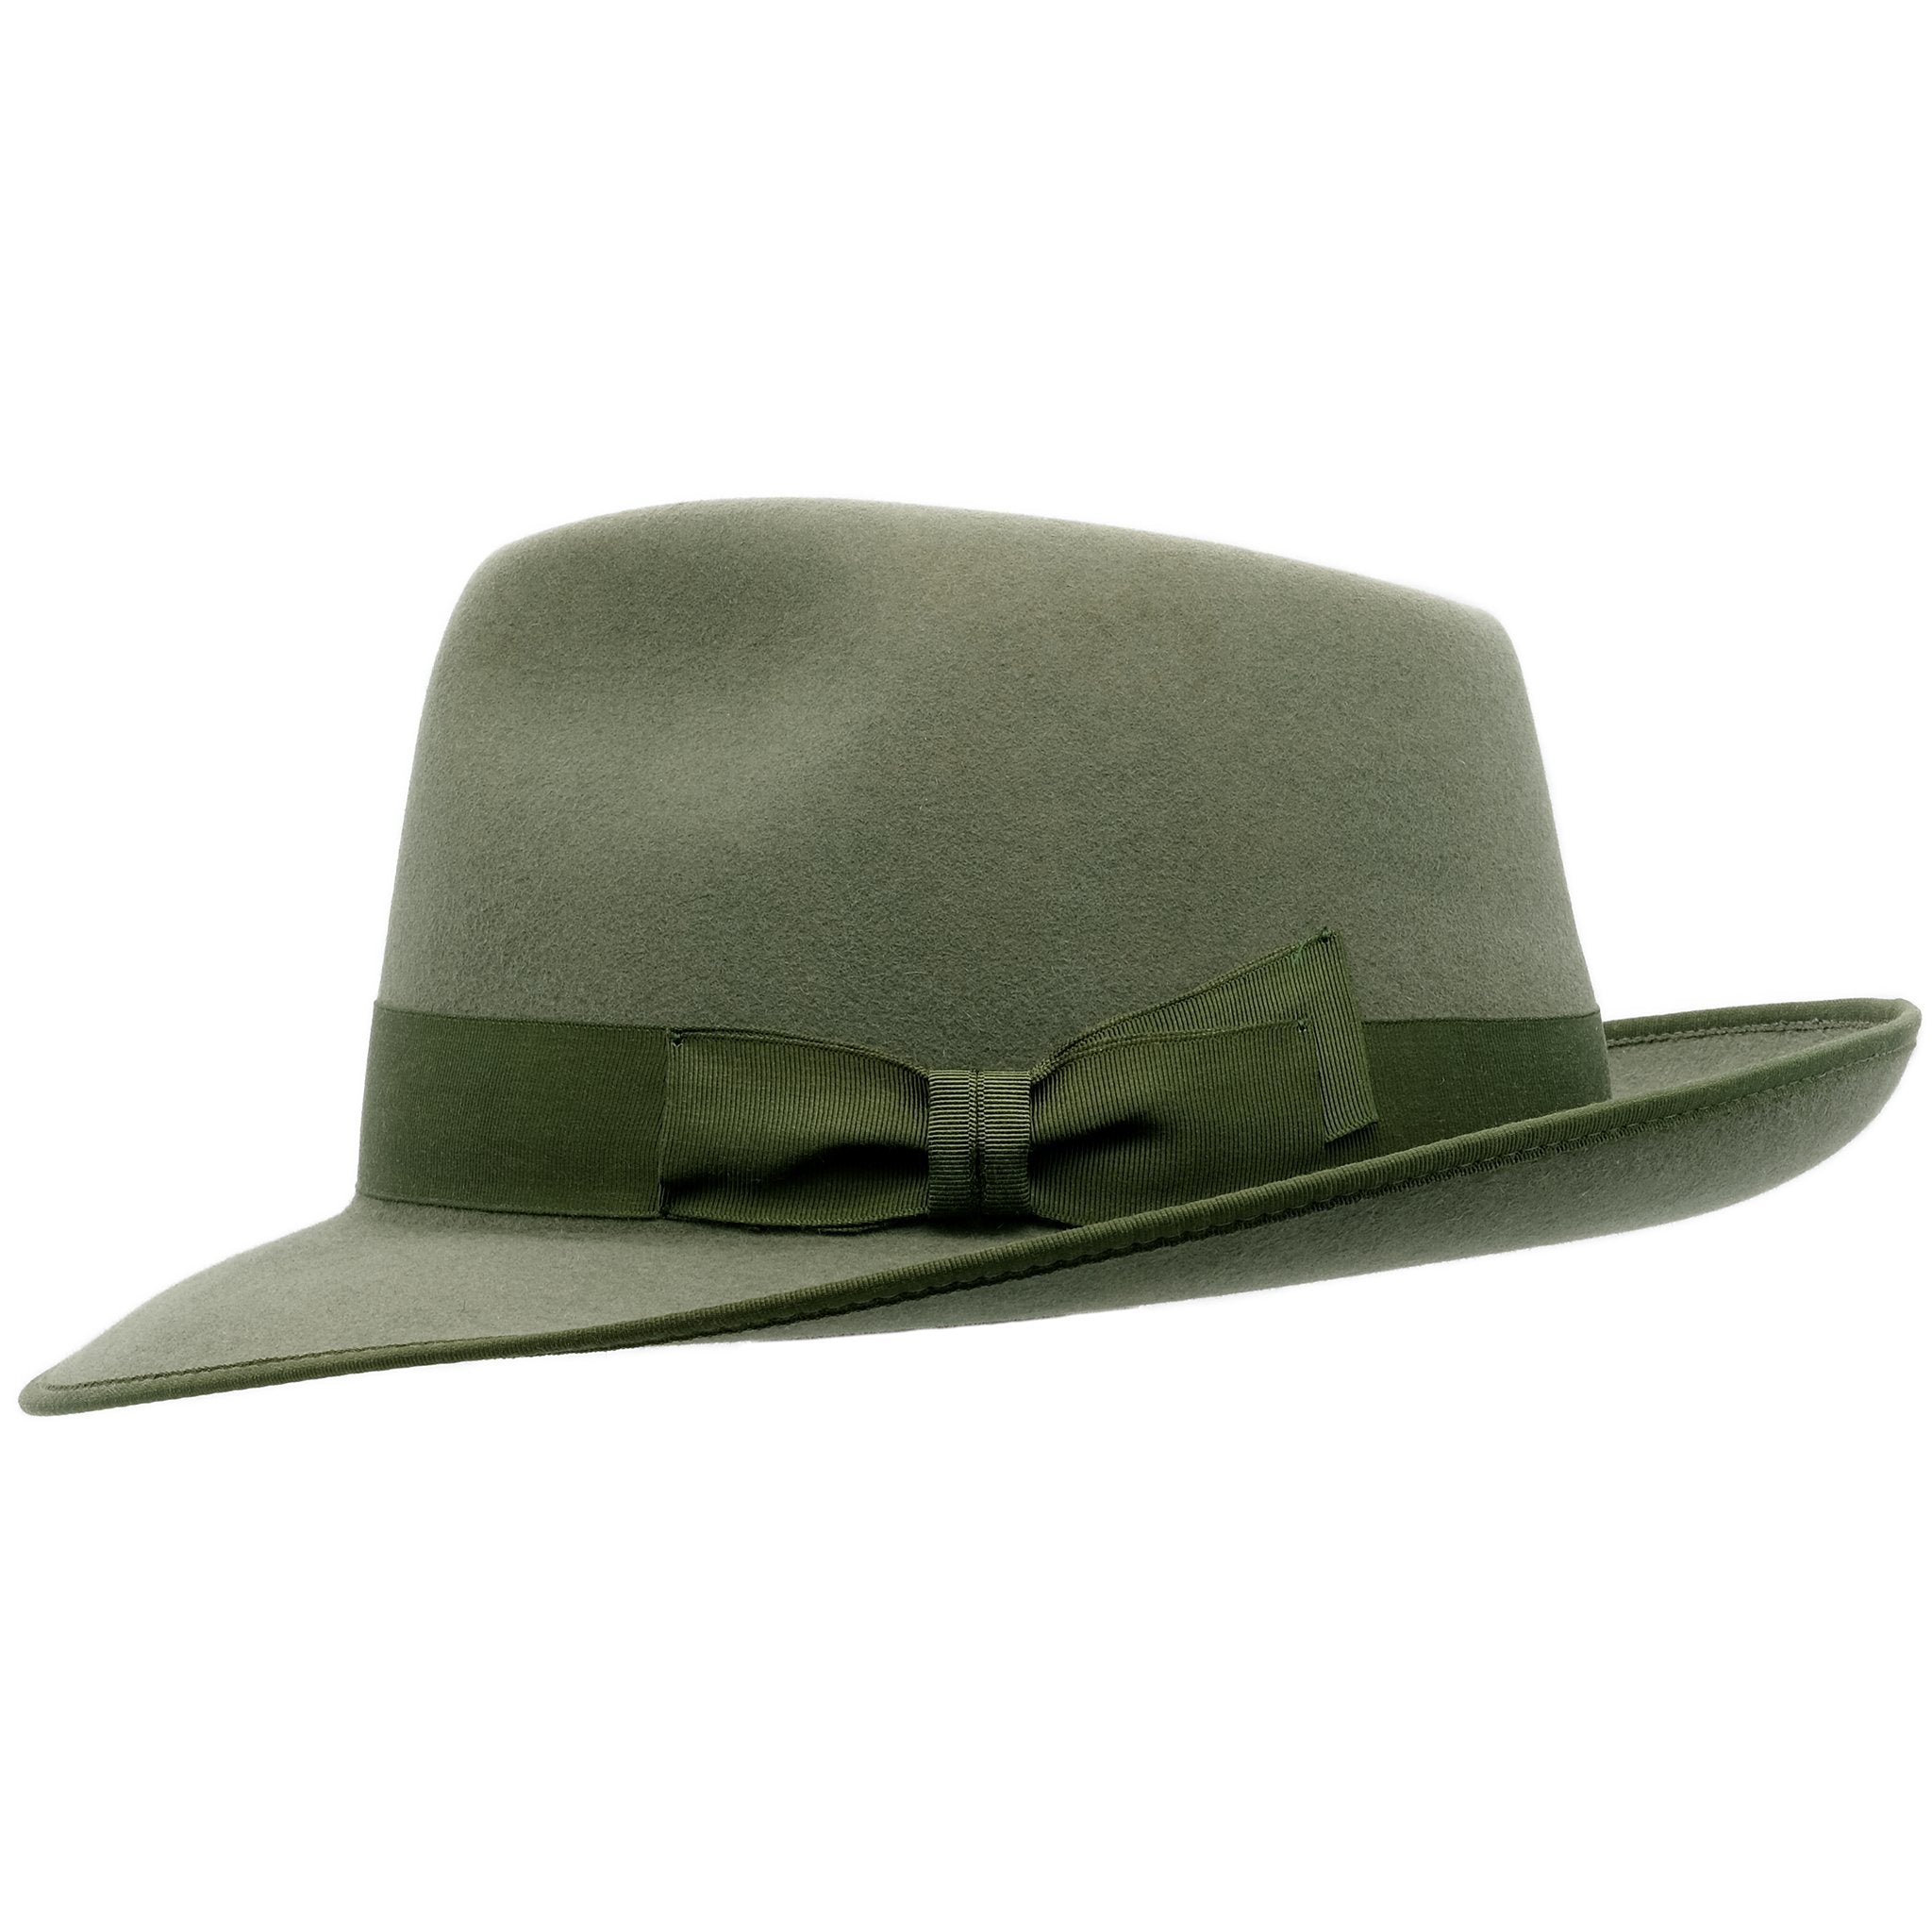 Side view of Akubra Stylemaster hat in Bluegrass Green colour